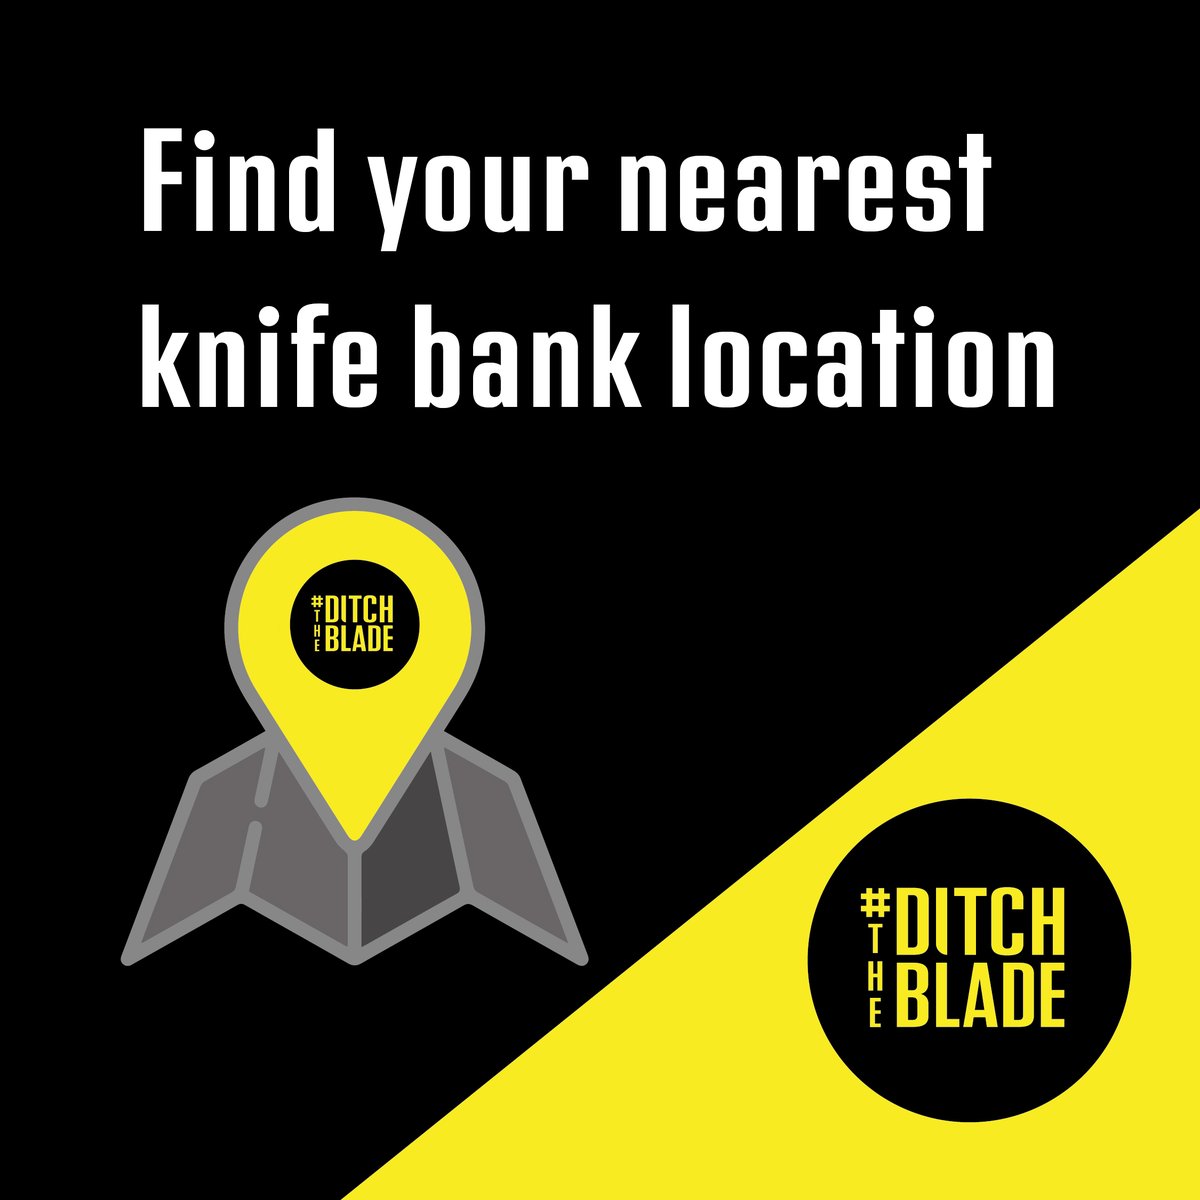 To launch the #DitchTheBlade campaign we’re promoting the network of knife banks located across the county for the anonymous surrender of knives. 

Find your nearest knife bank here: orlo.uk/rRrKU